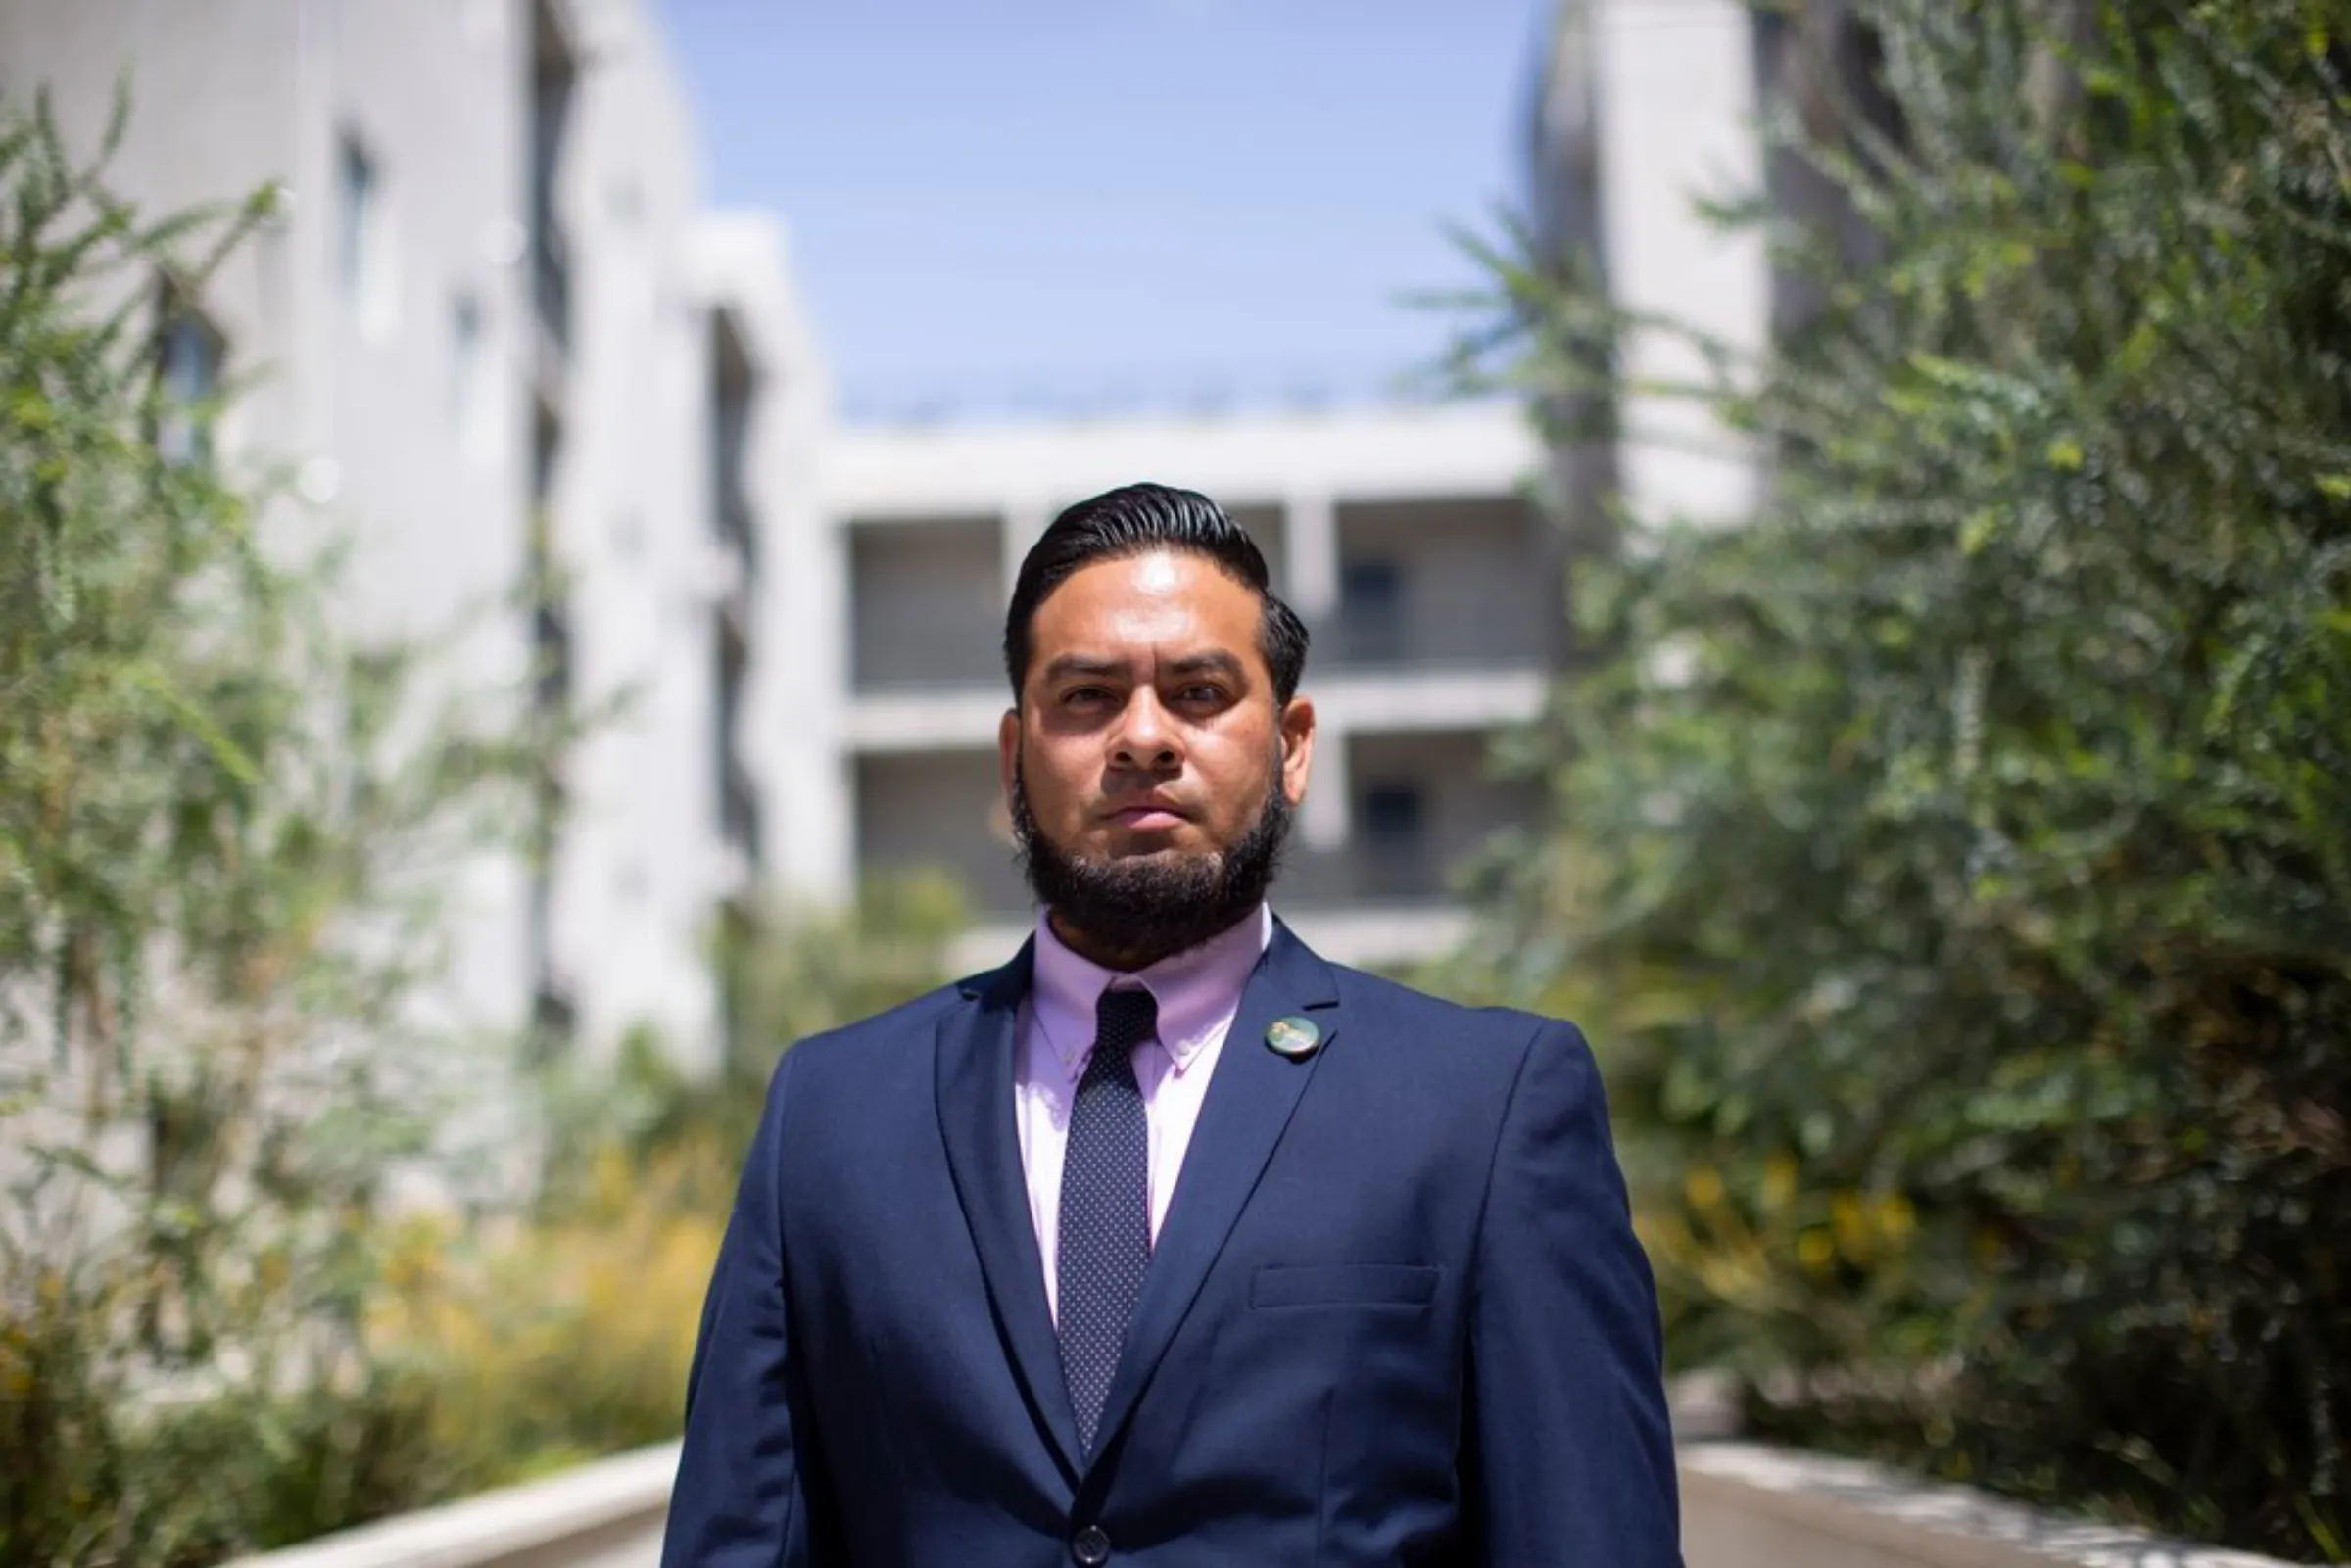 Edgar Campos, the executive direct of T.R.U.S.T. South-L.A., a south Los Angeles community land trust, stands in front of an affordable housing residential development in Los Angeles, May 19, 2021